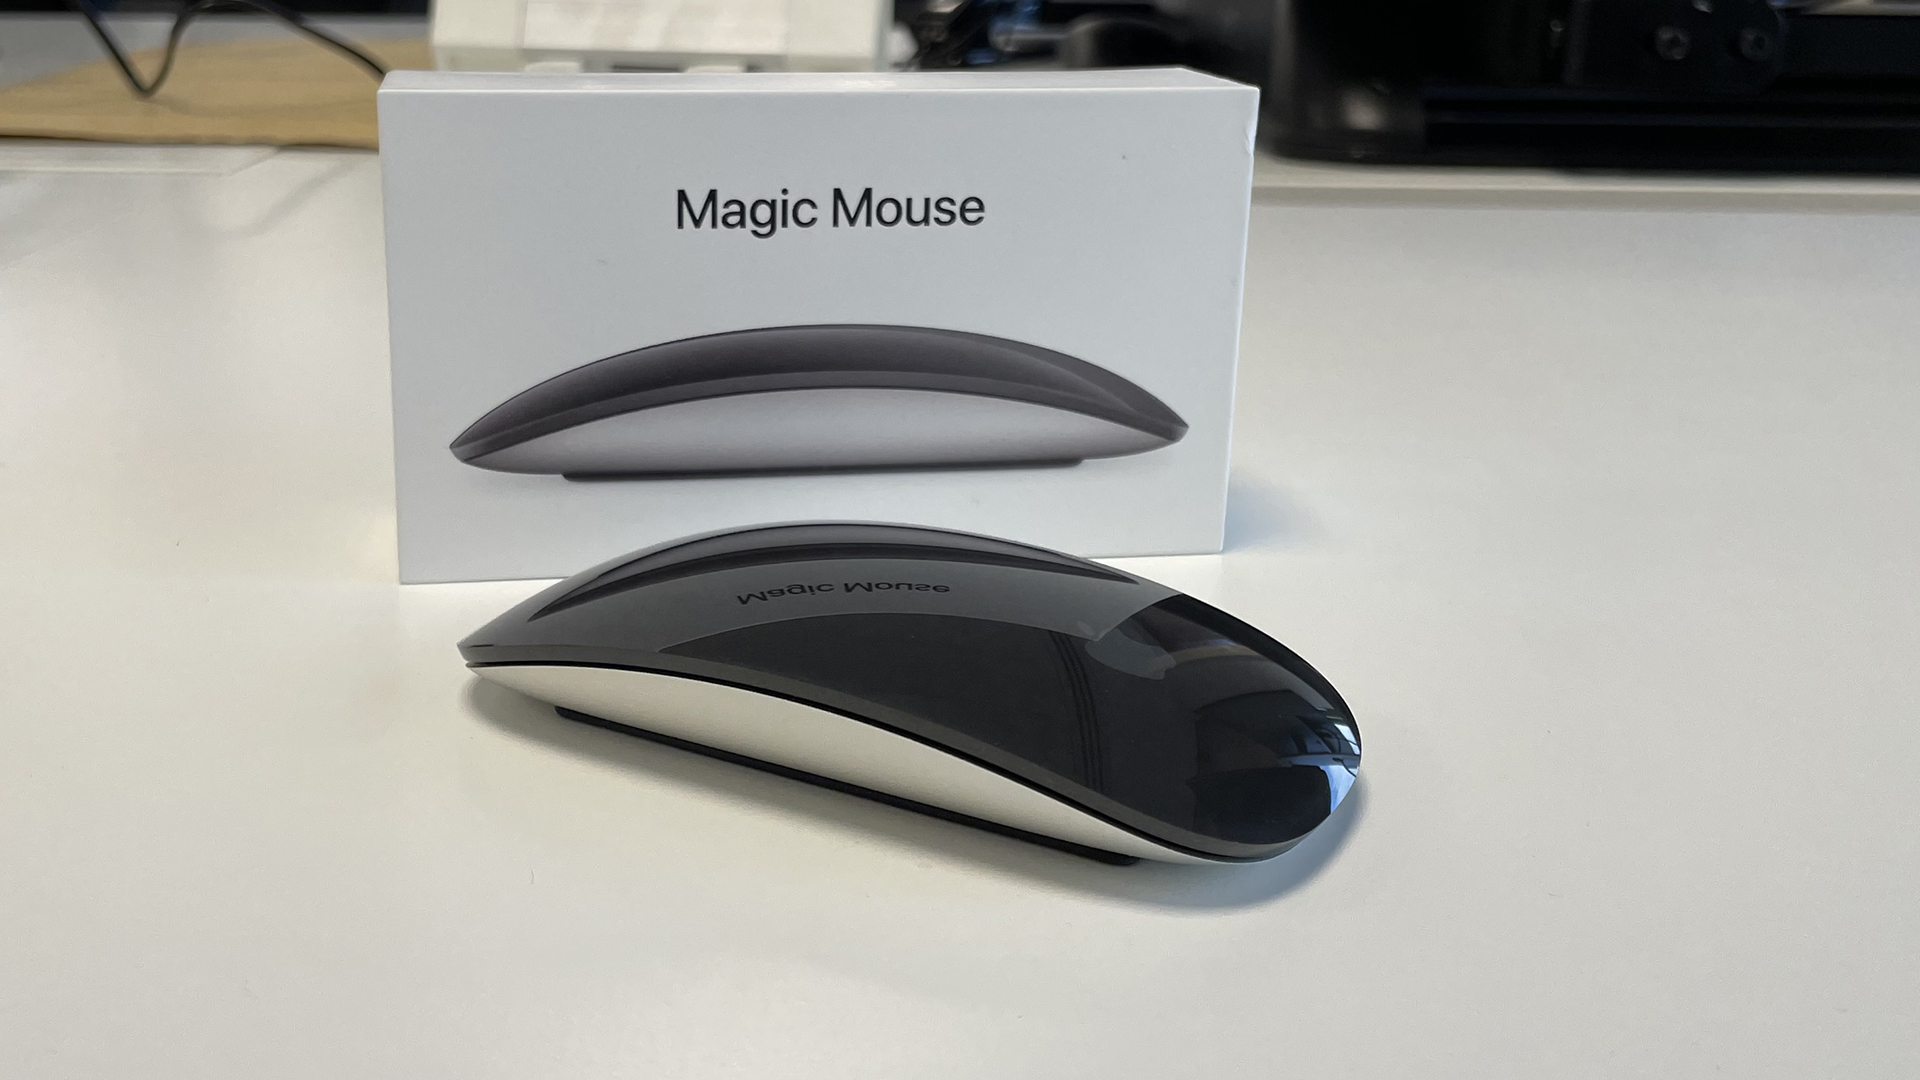 The Apple Magic Mouse sat next to its box.